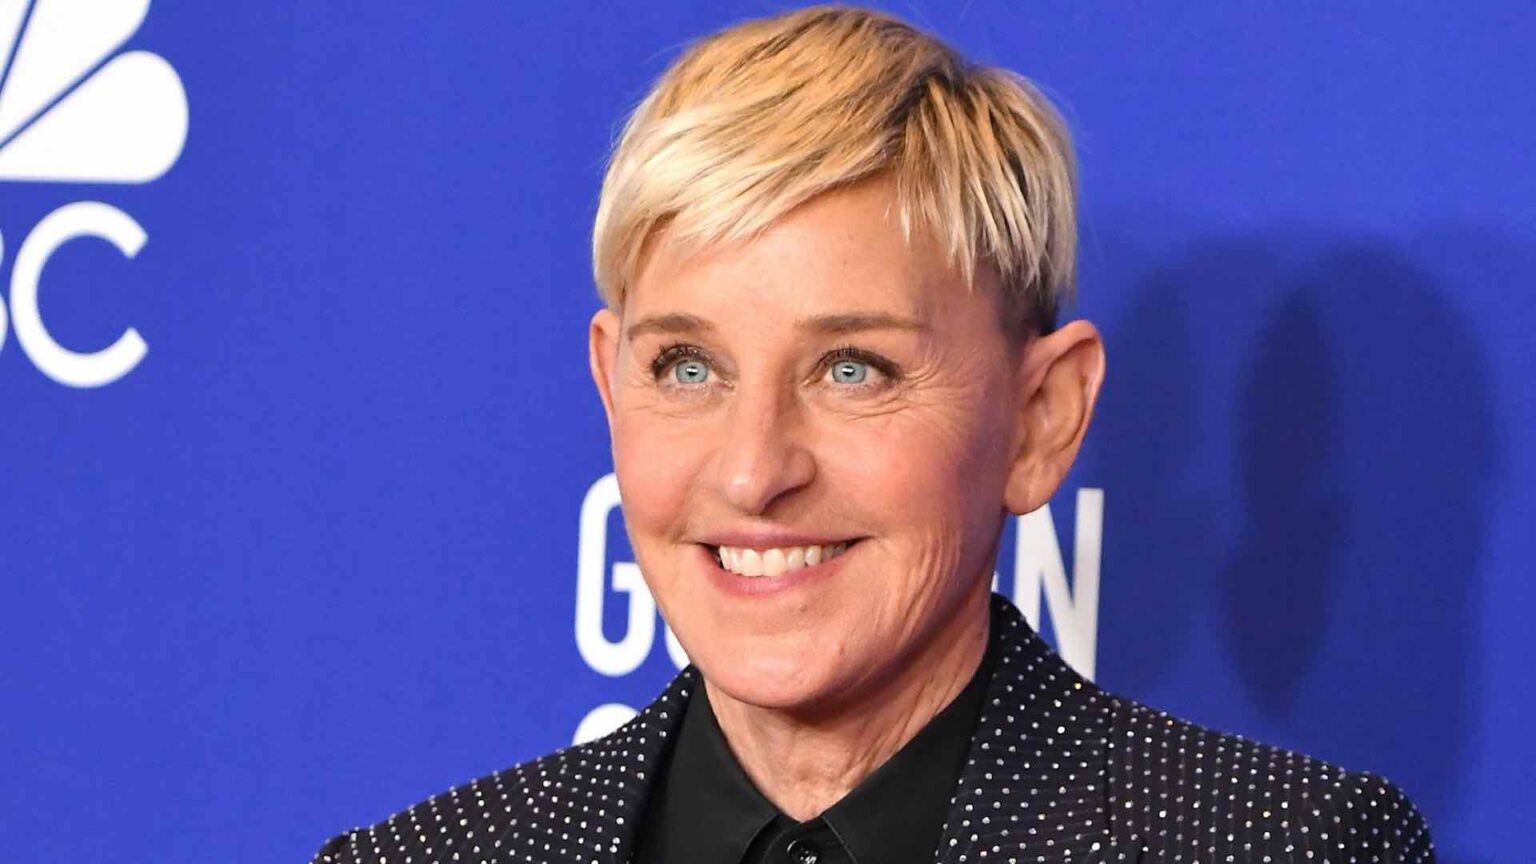 Ellen DeGeneres is ready to rehabilitate her image – or so she claims. Did Ellen just admit she's mean? Let's find out.